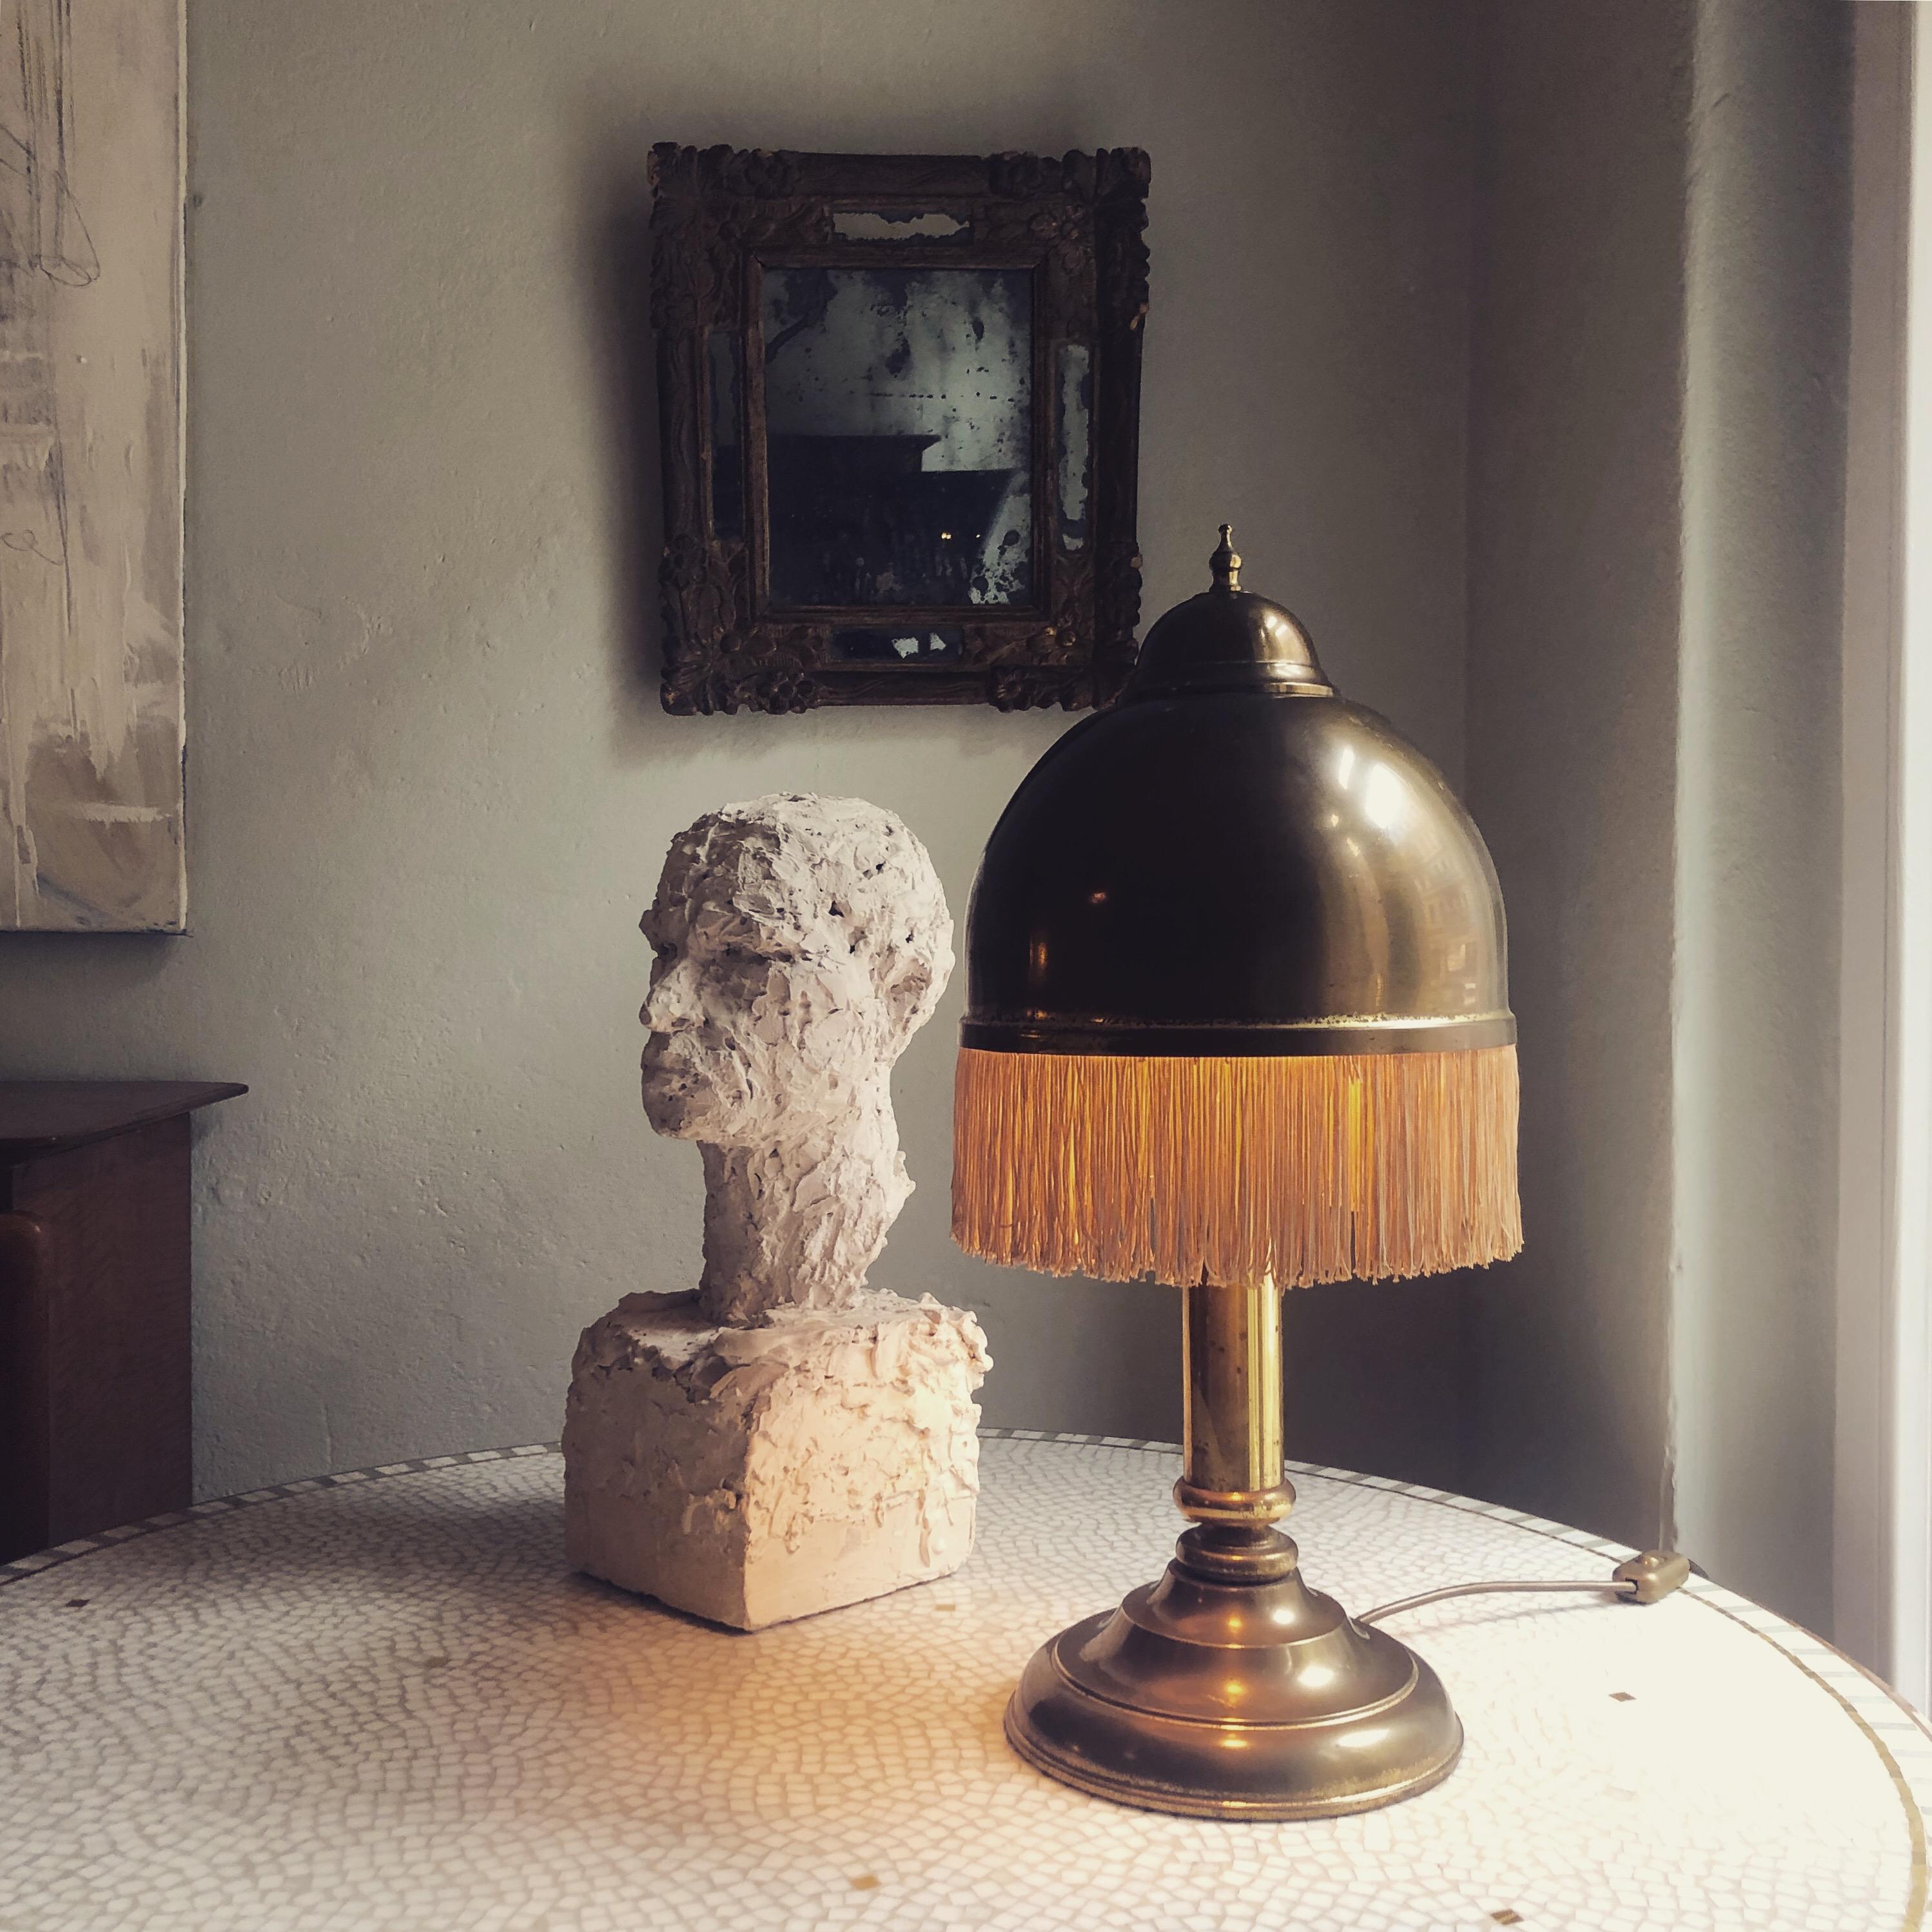 This beautiful brass table lamp is produced in the Style of Hans-Agne Jakobsson, circa 1960.
The silk fringes give the lamp a very special and elegant look.
It could be also done in the 1920 as it has this Art Deco style.
A great eyecatcher for your